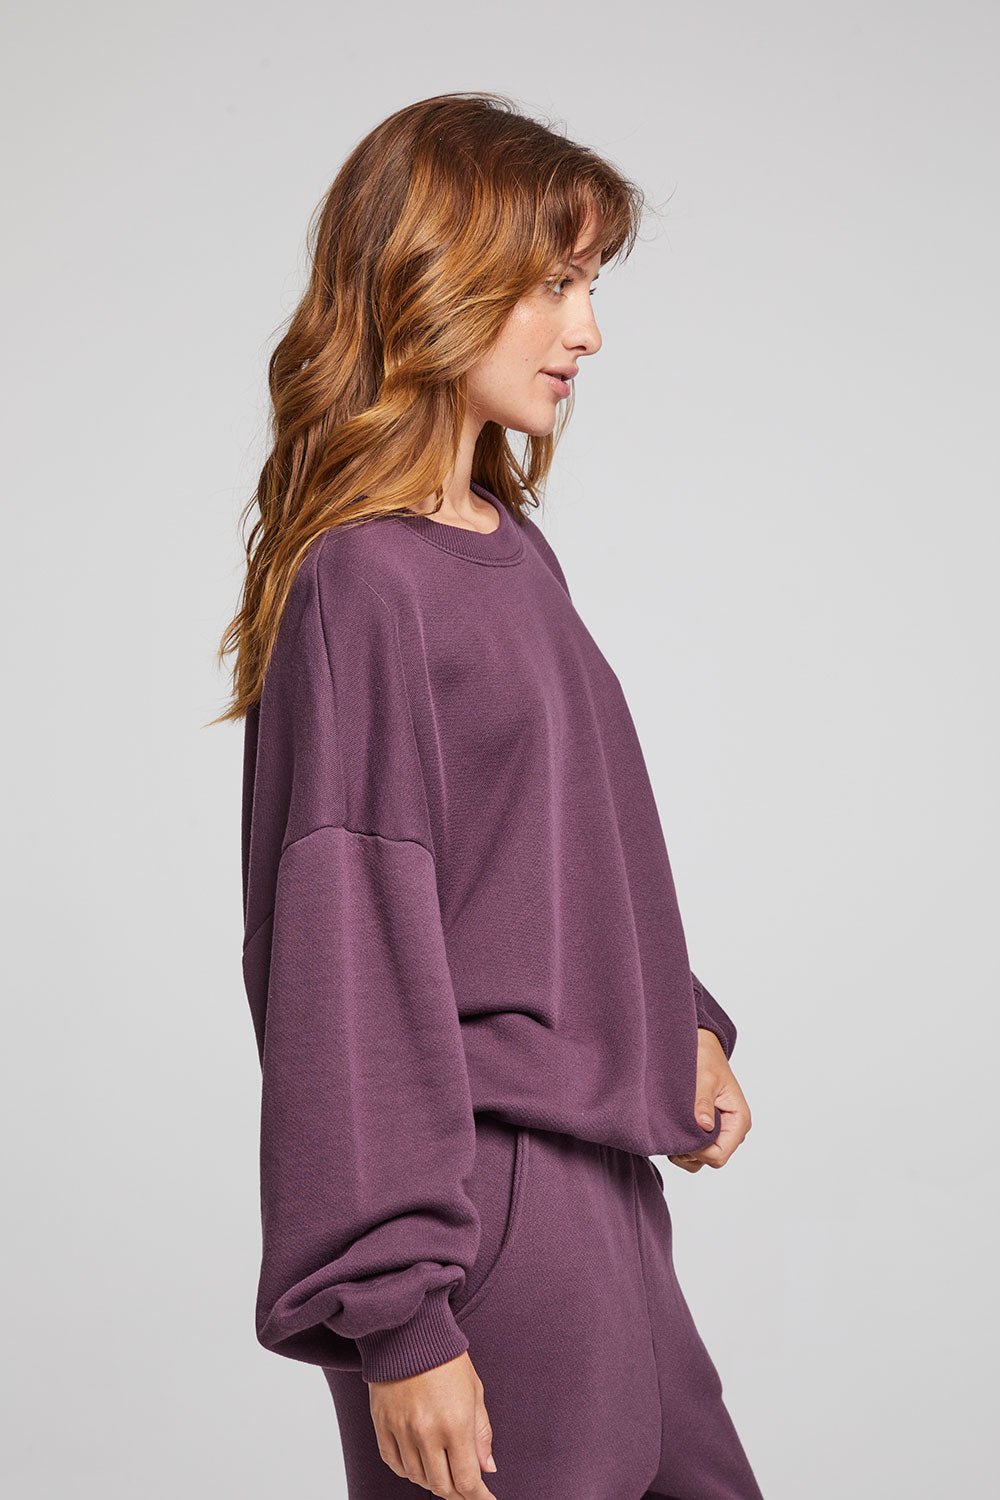 chaser-casbah-plum-pullover-02